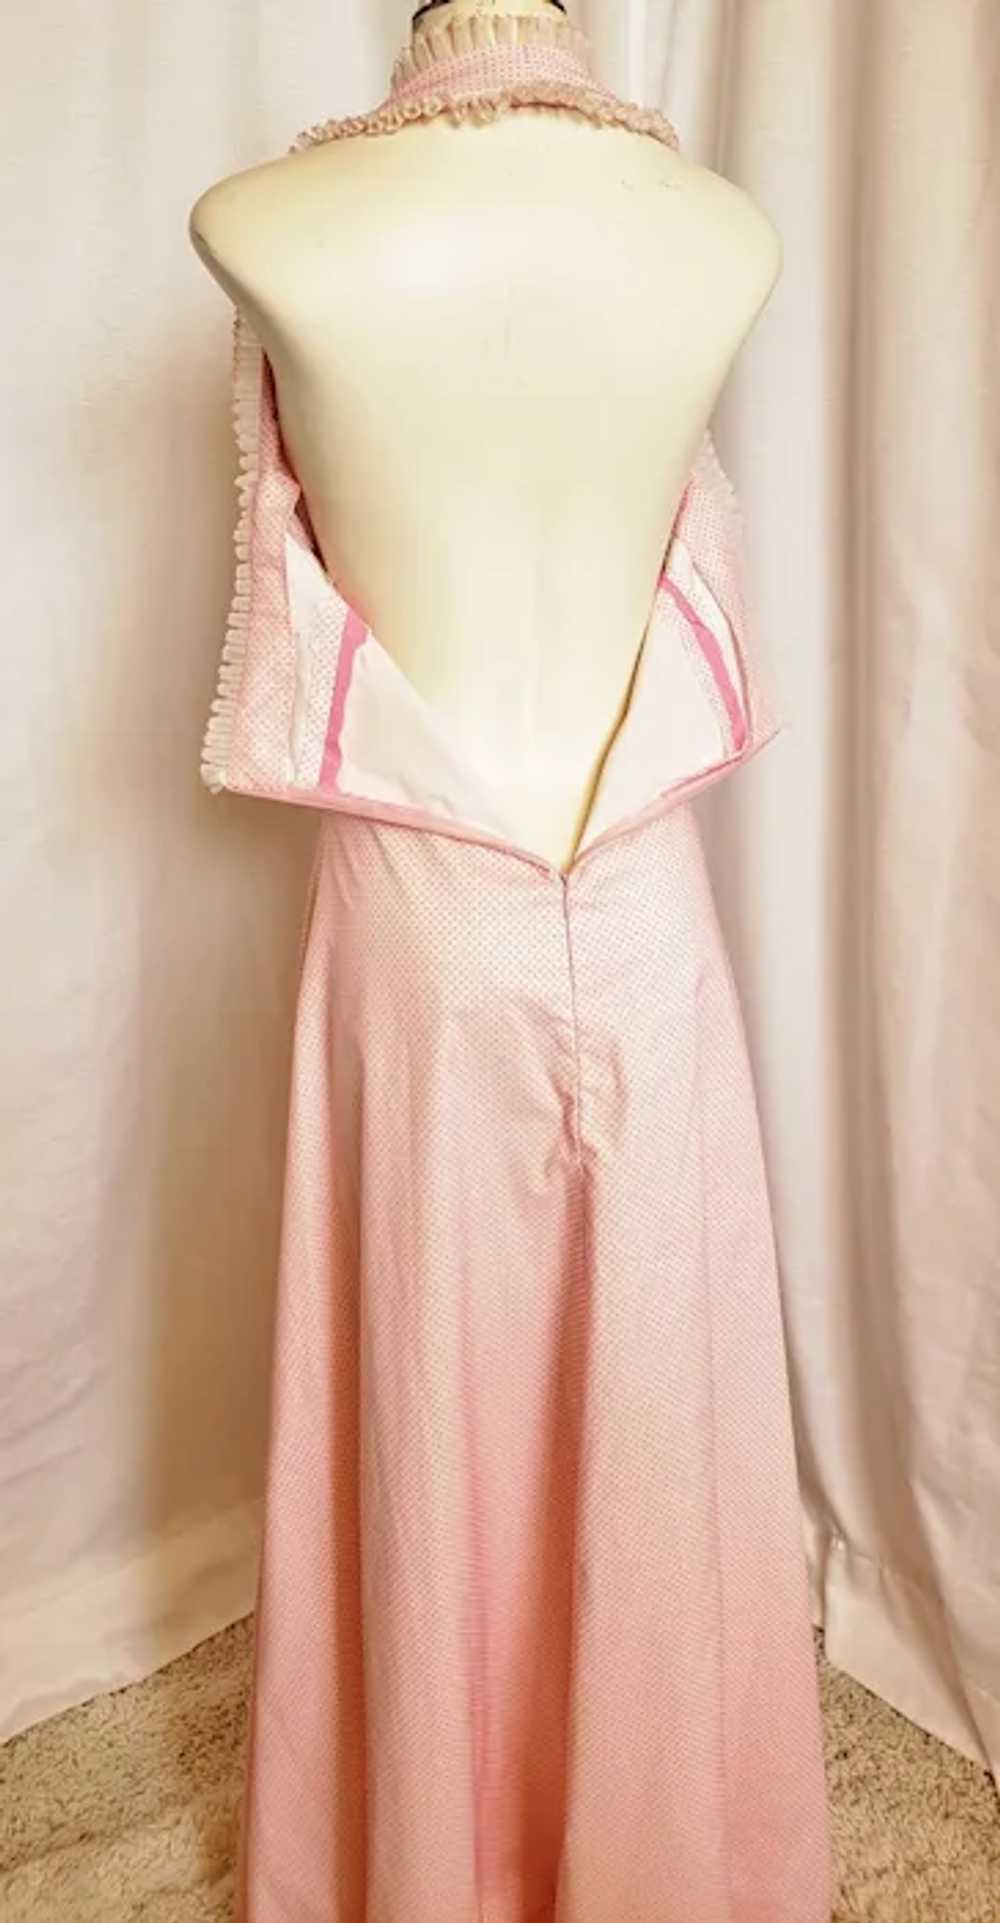 Pretty in Pink, Dotted Swiss Halter Dress - image 9